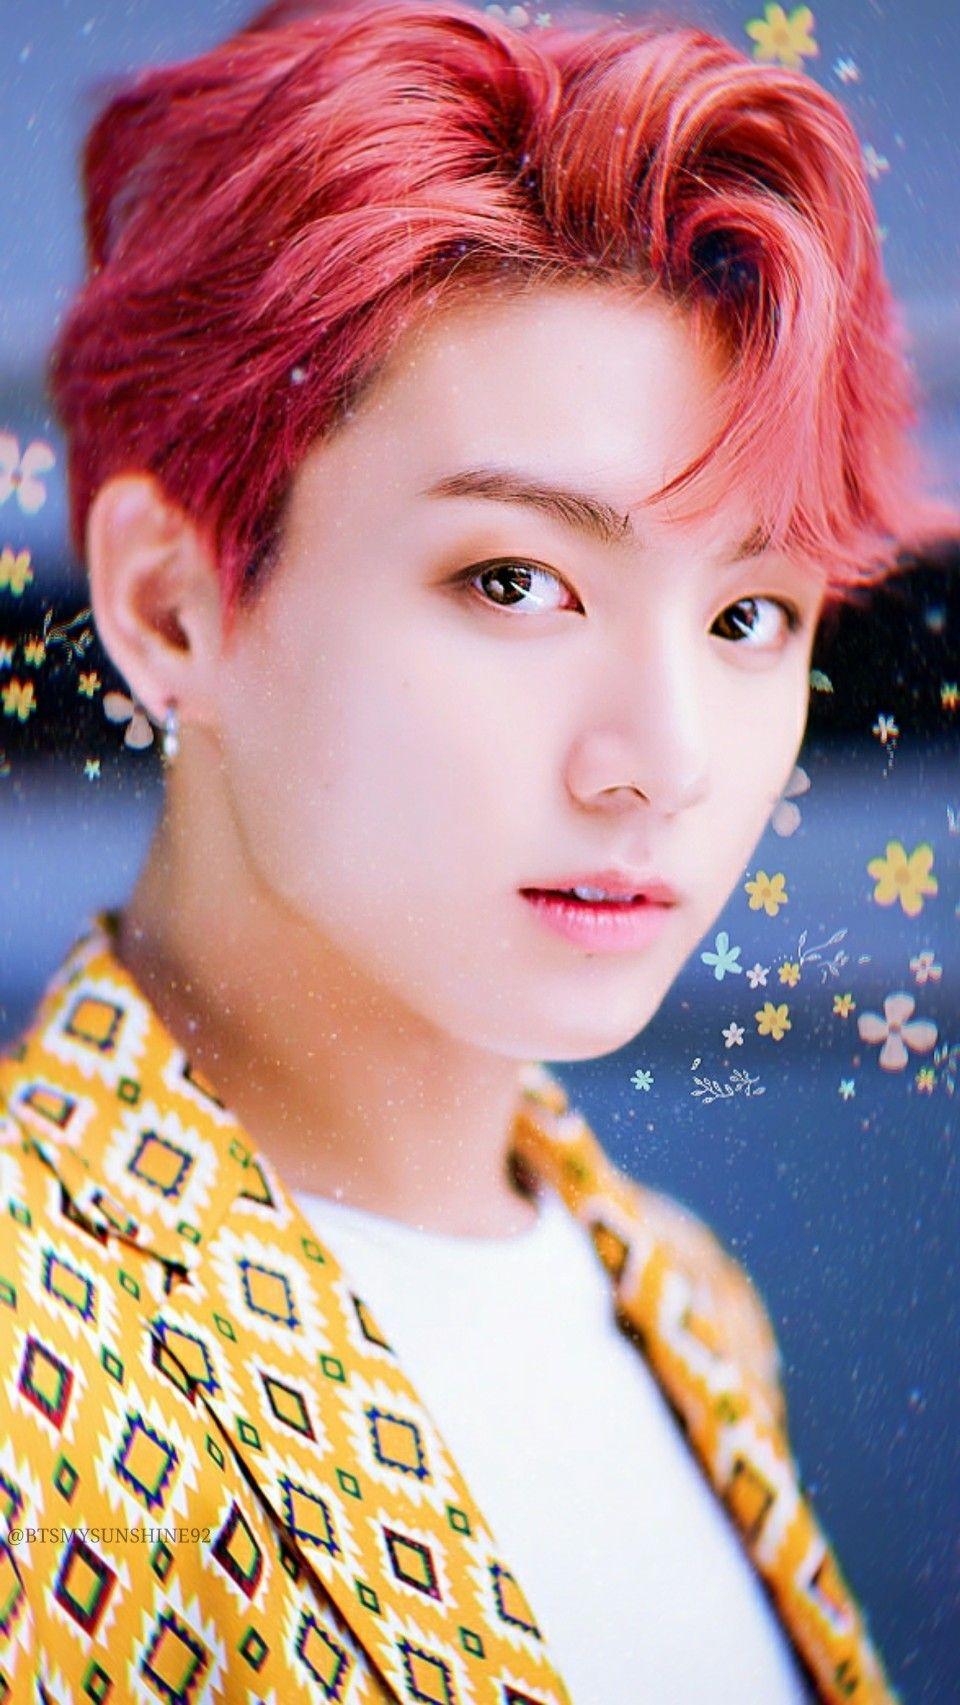 Have You Seen These Rare And Unseen Photohoots Of BTS Jungkook Yet?